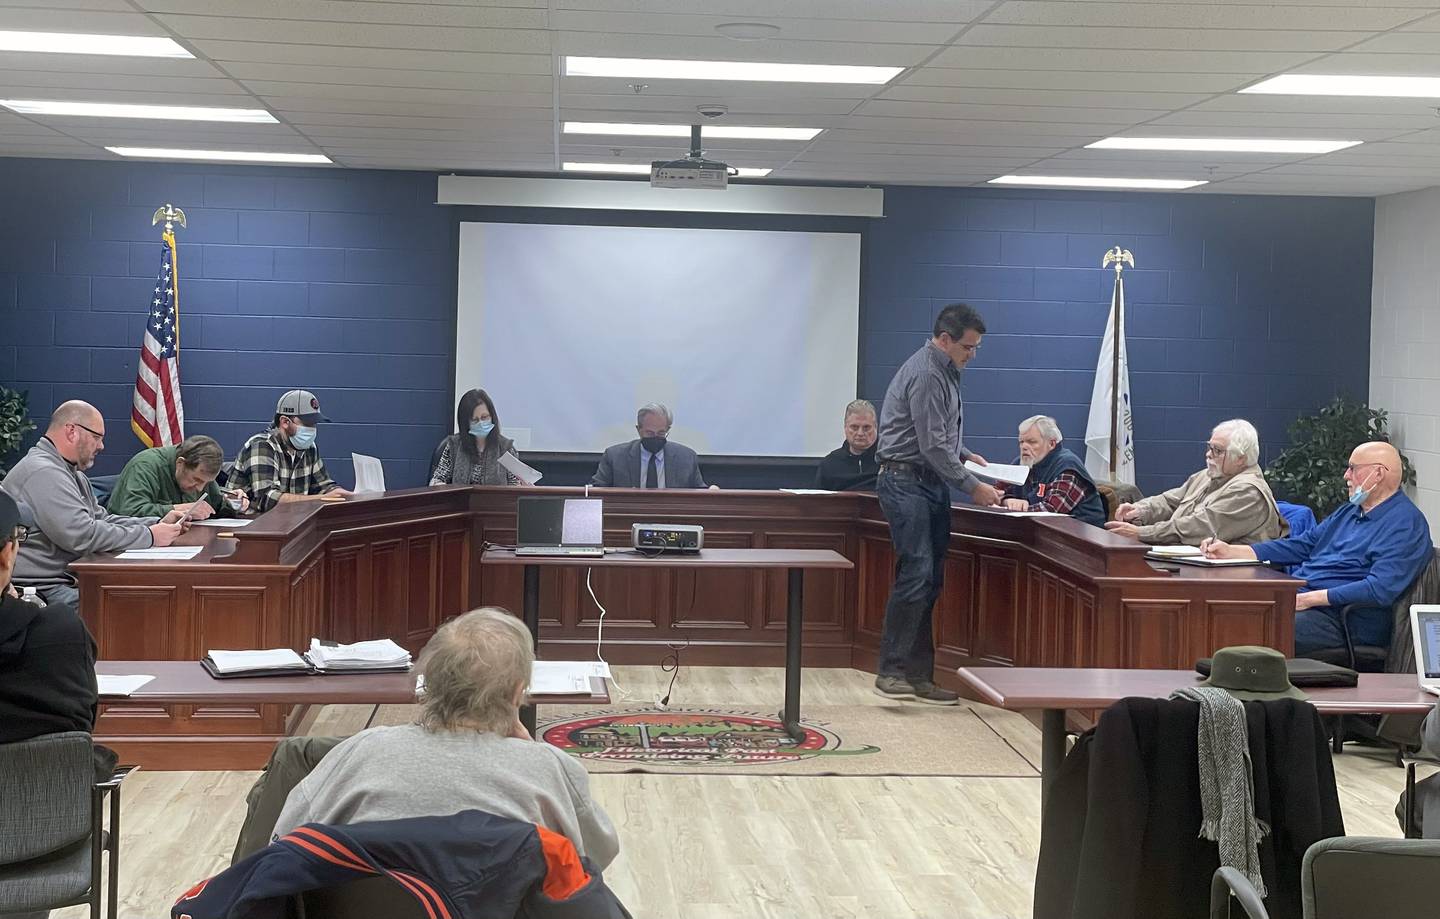 Village Engineer Kevin Heitz gives the Utica Planning Commission a handout of the drawing of a newly proposed "The Shoppes of Mini Mill Street" at the Village Hall on Thursday Jan. 27, 2022.